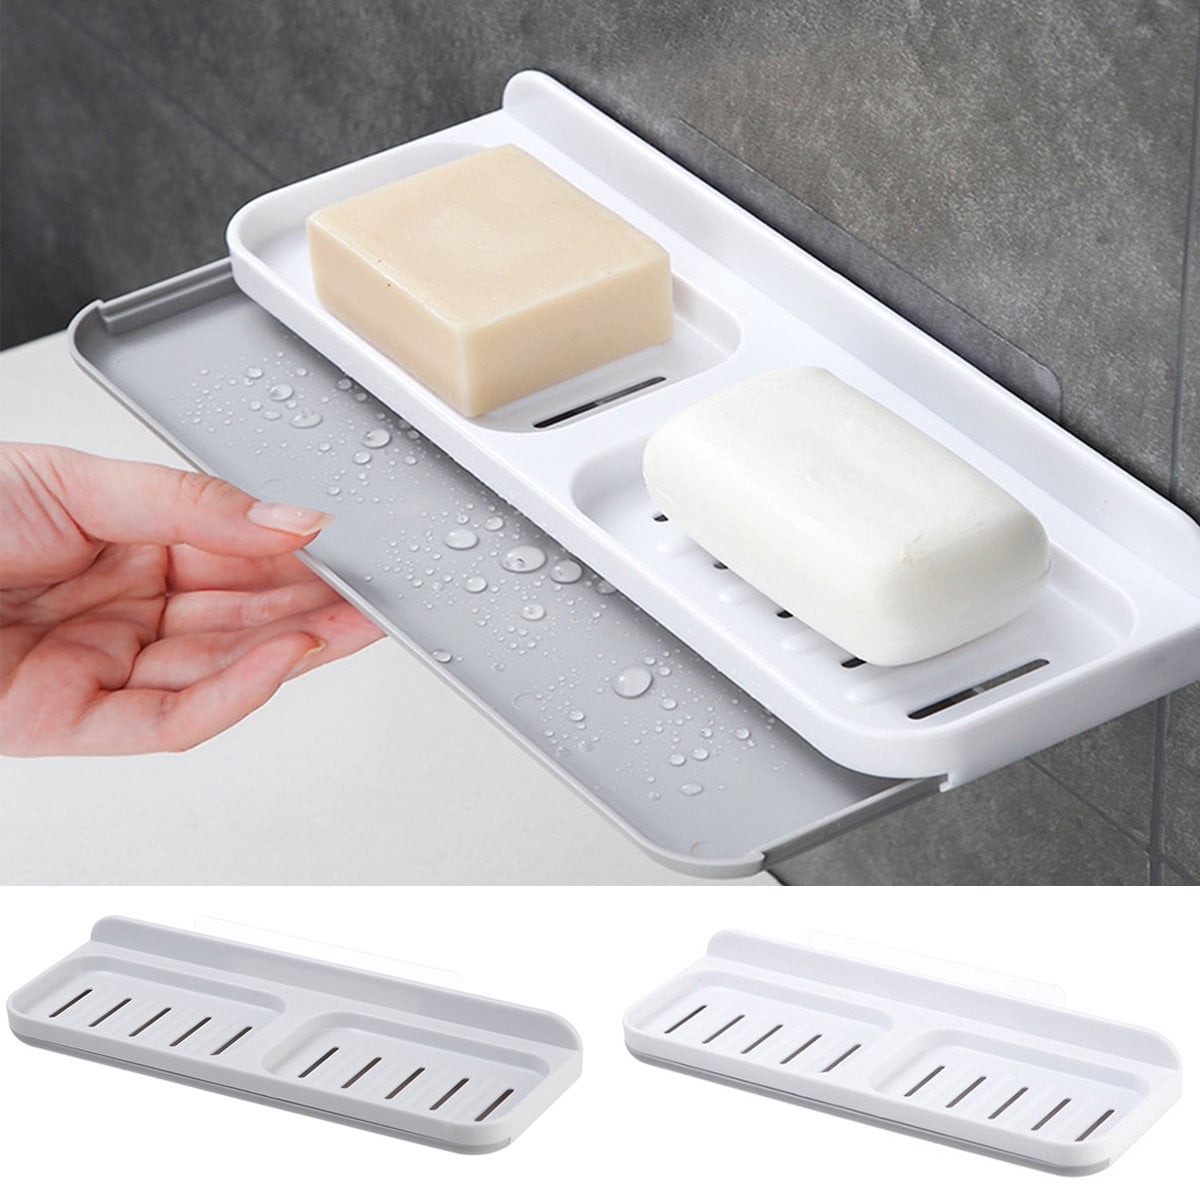 Adhesive Wall-Mounted Soap Holder Box with Hanger & Water Collector  Dual-Layer Soap Dish for Bathroom Kitchen Gray White